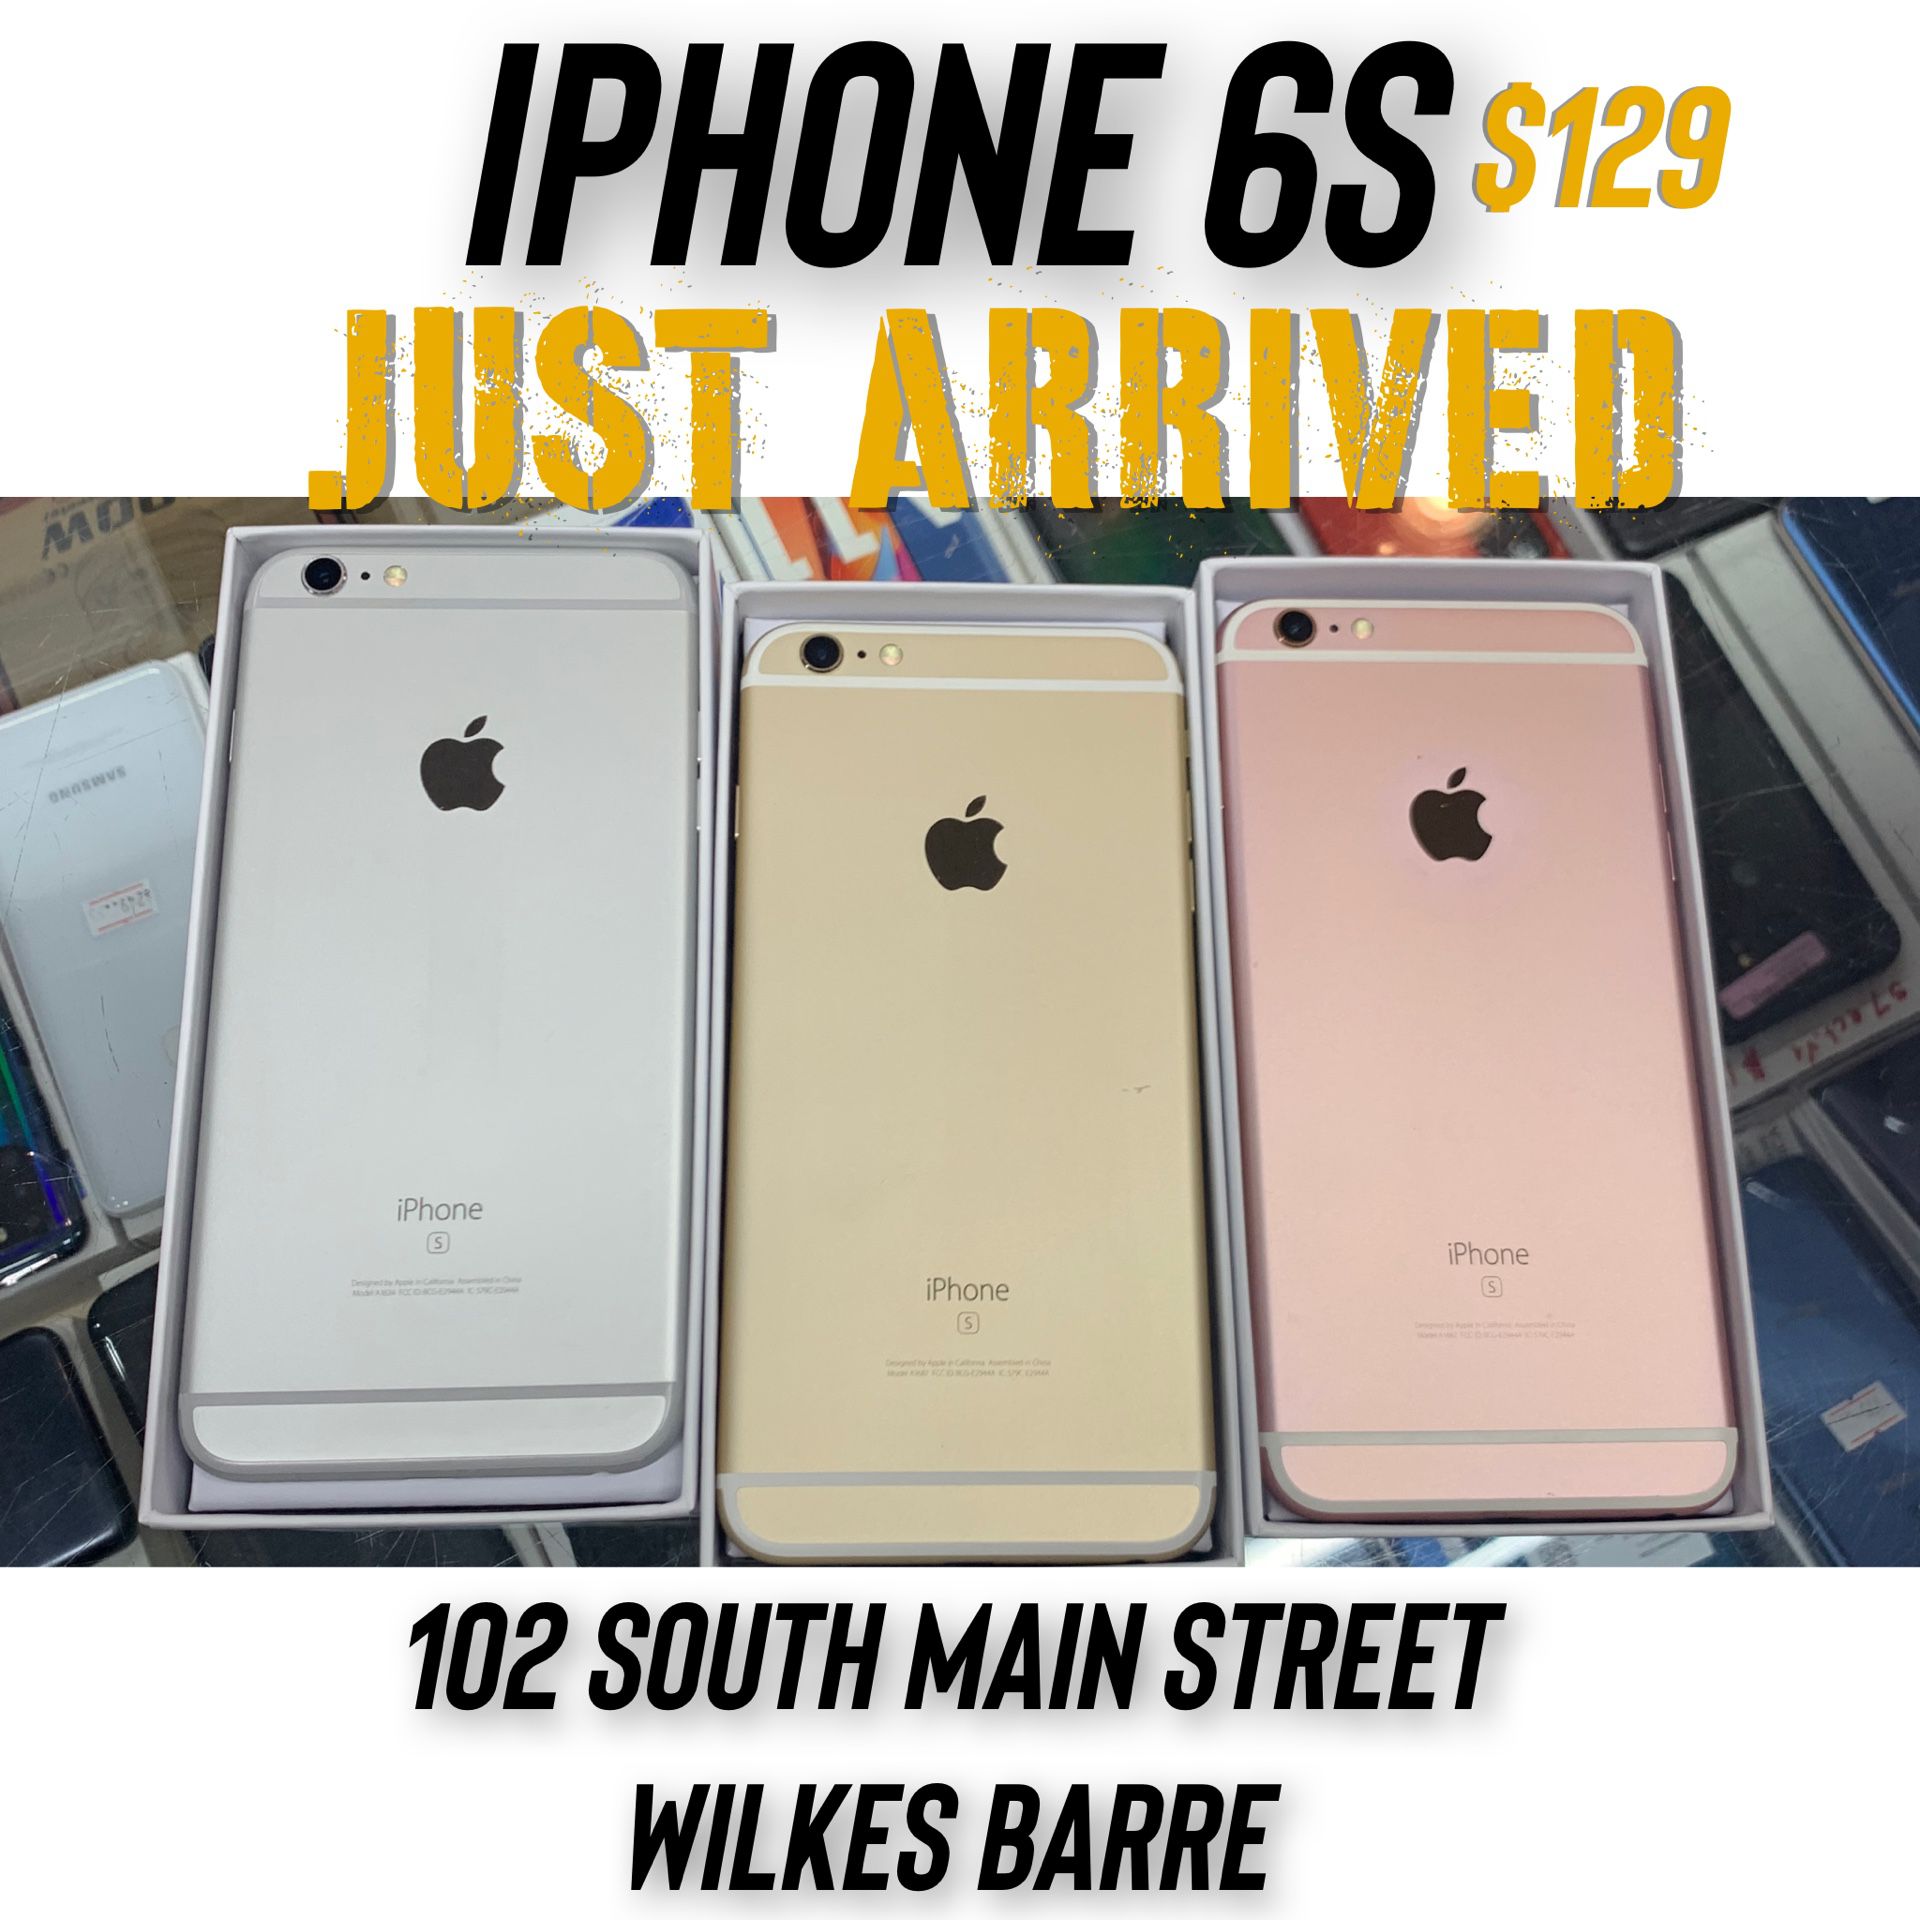 IPHONE 6S SPECIAL PRICE